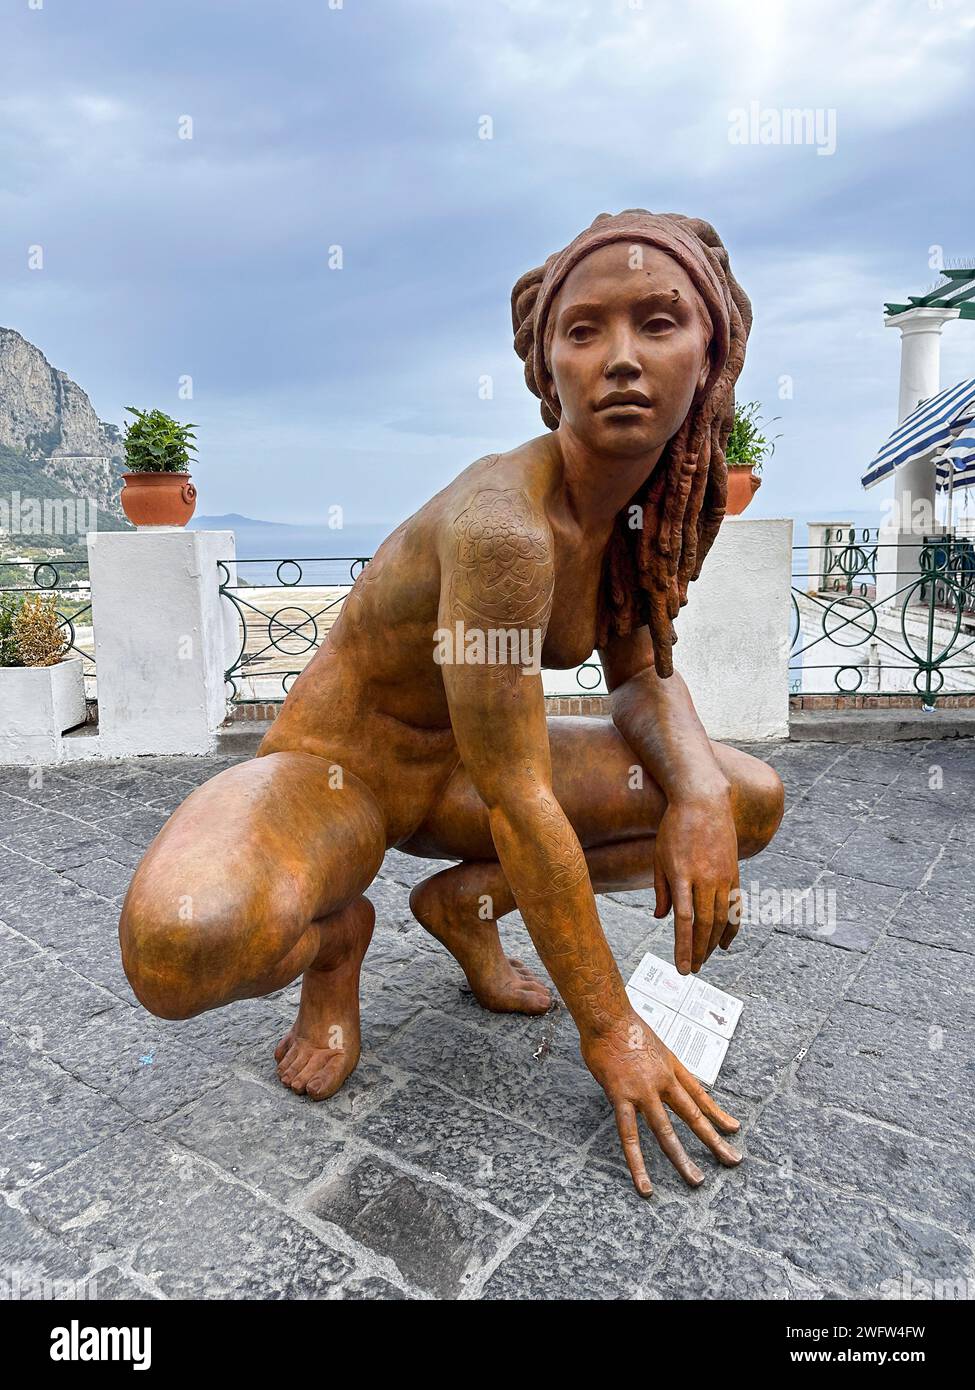 A sculpture on the ground near flowers and rocks in Capri, Italy Stock Photo